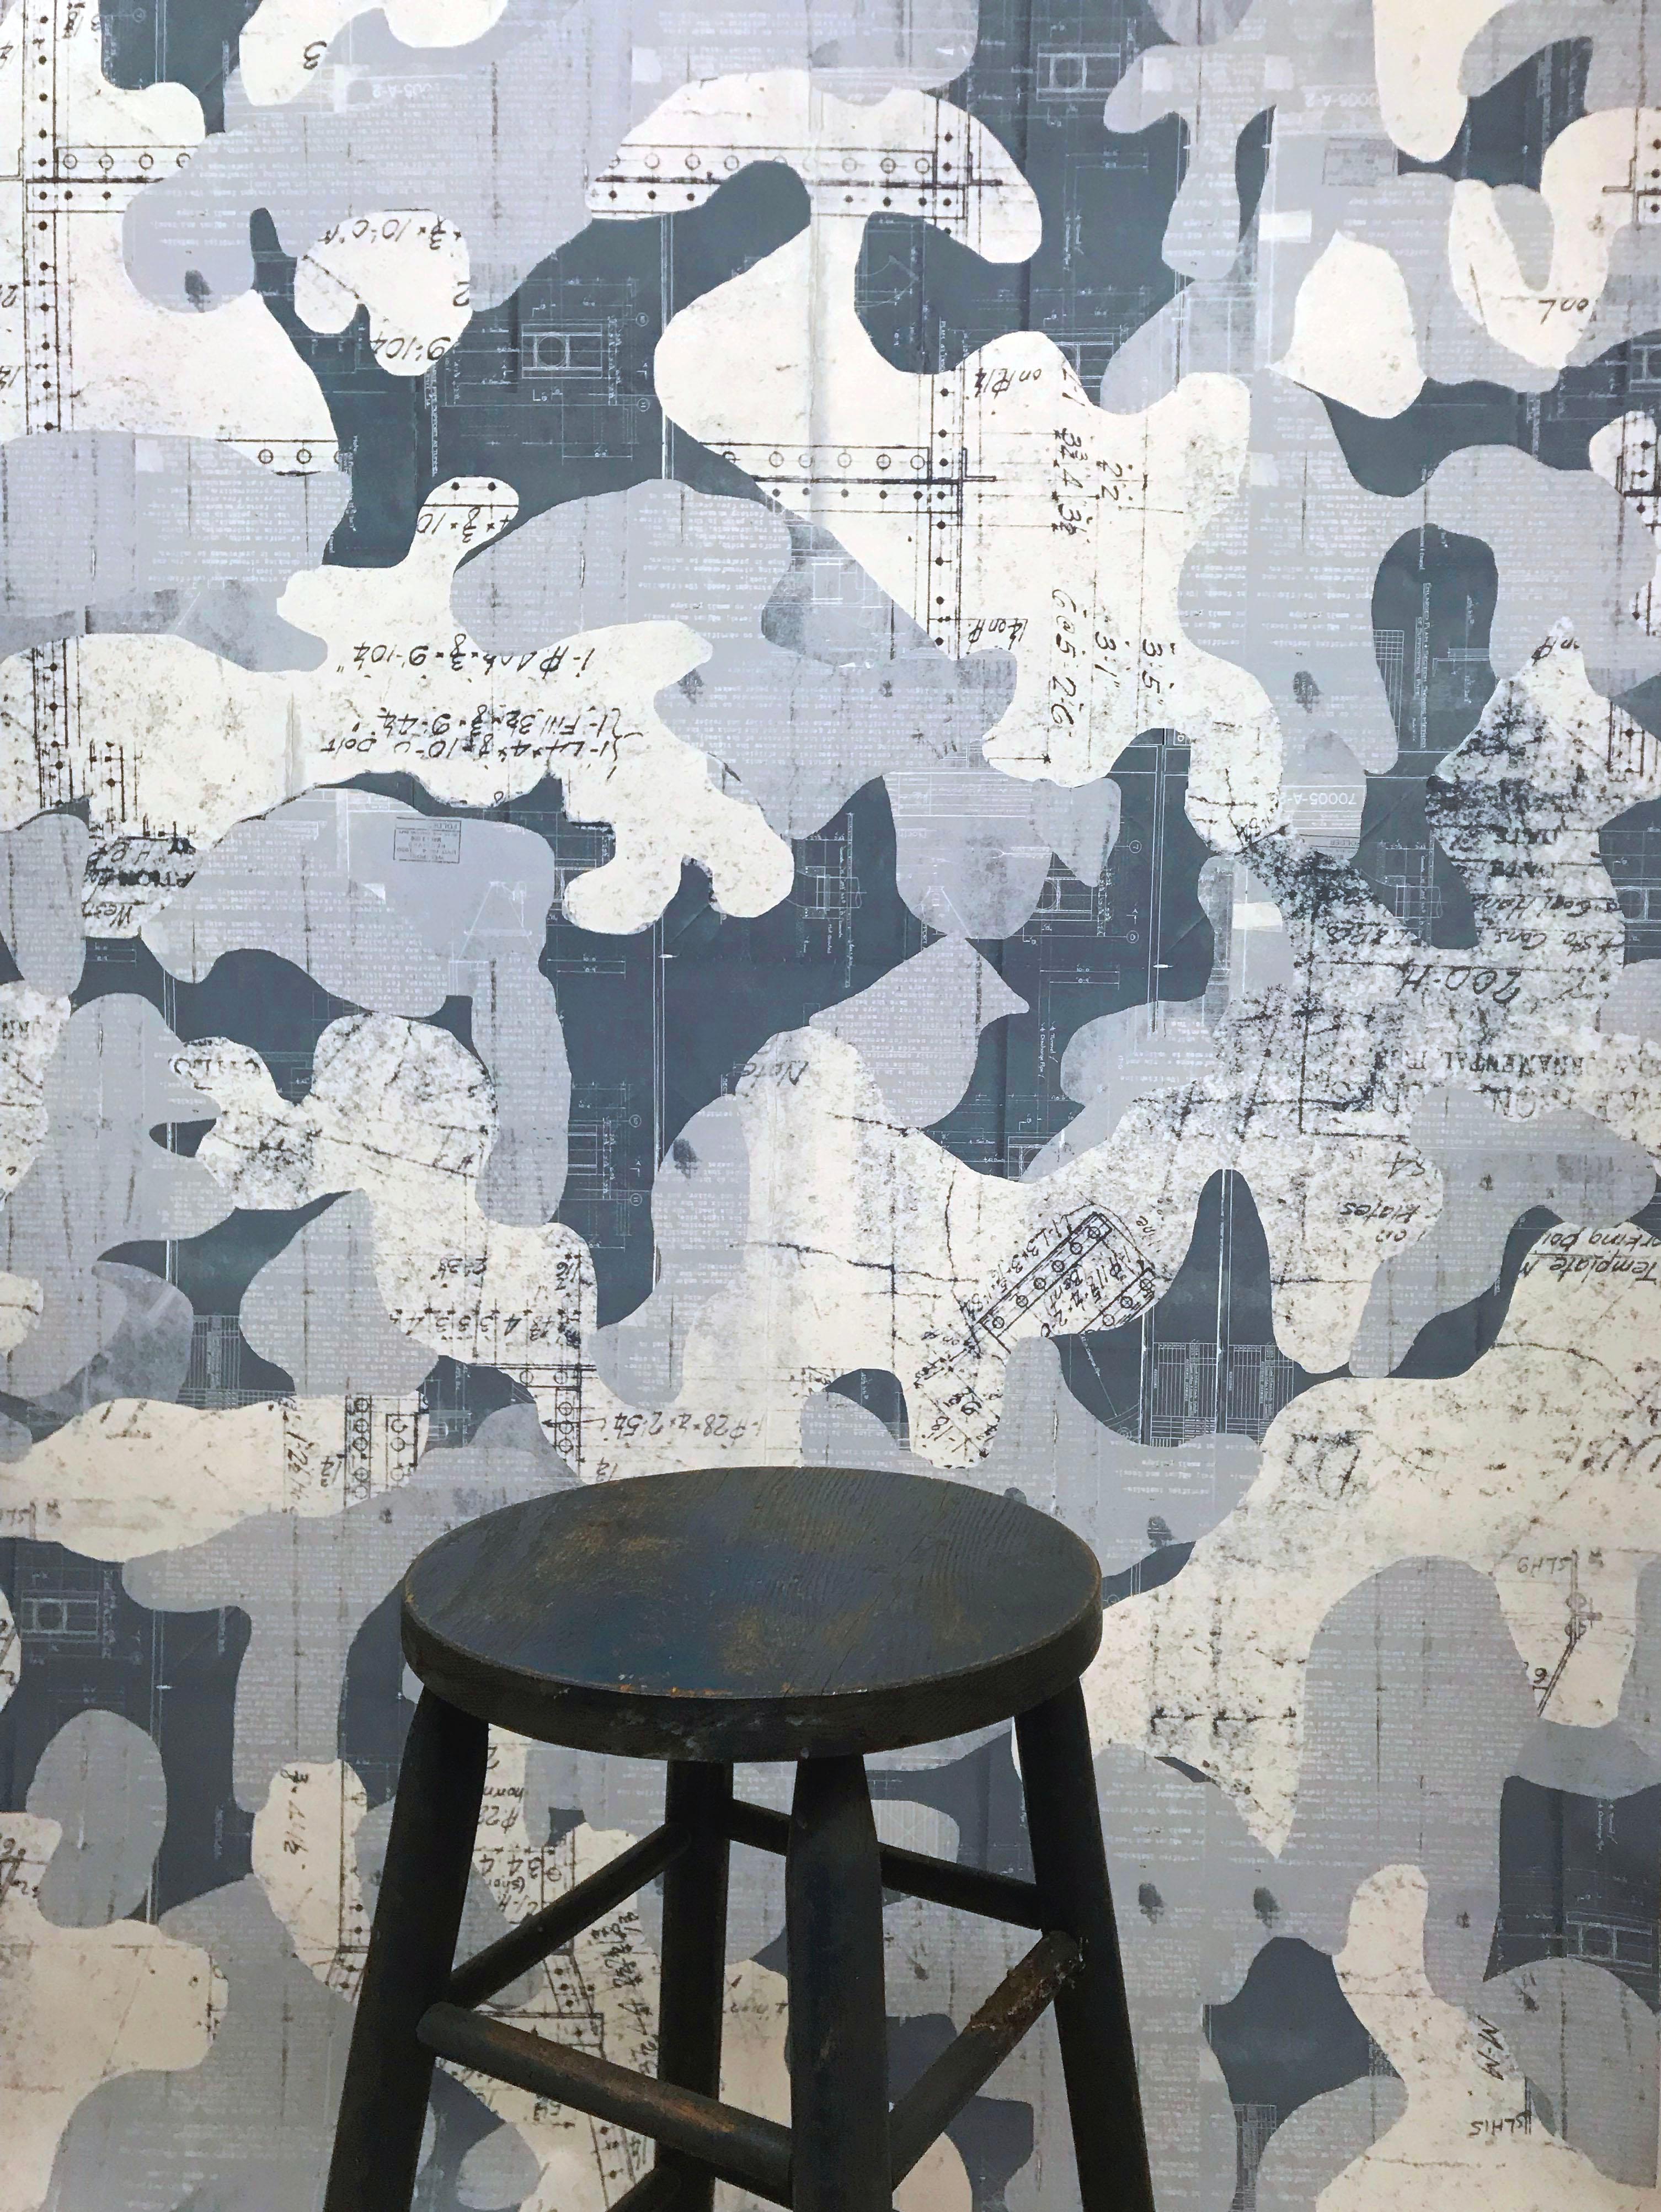 Escape was created using found vintage blue prints from the early to mid 1900s and placed into a fluid, hand drawn camouflage pattern. Intrigued by the idea that blue prints and camo have a utilitarian purpose, we combined them creating an opposite